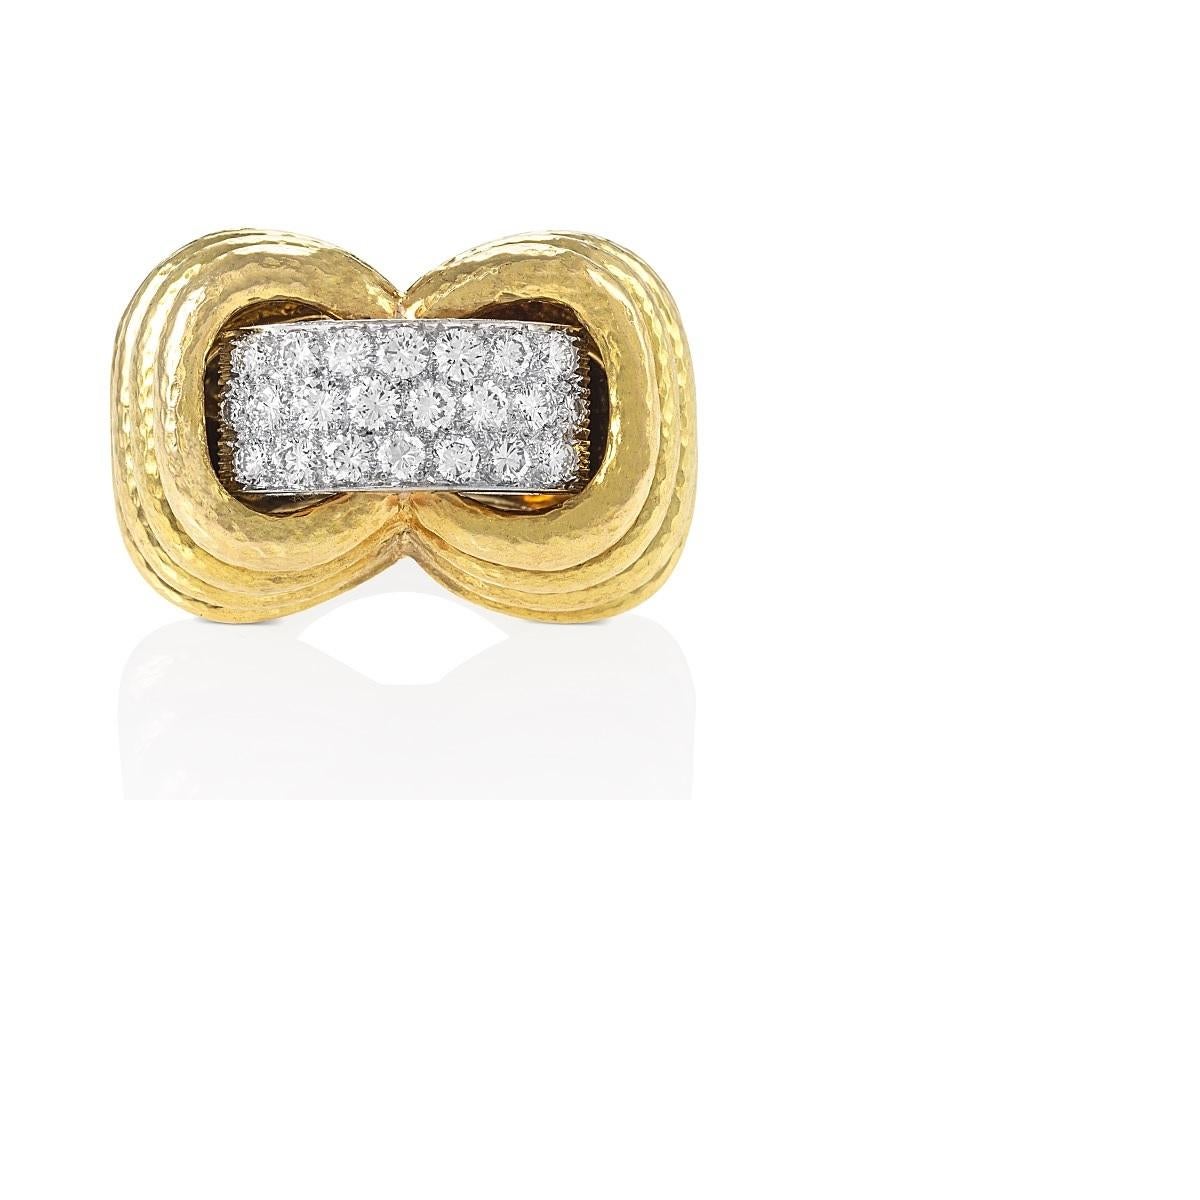 An 18 karat gold, platinum and diamond ring, by David Webb. The hammered bombé form mount with stepped sides centers a band of 21 round brilliant-cut diamonds, approximate total weight 2.15 carats, with a F/G color and VS clarity.  
Size 5-3/4

This